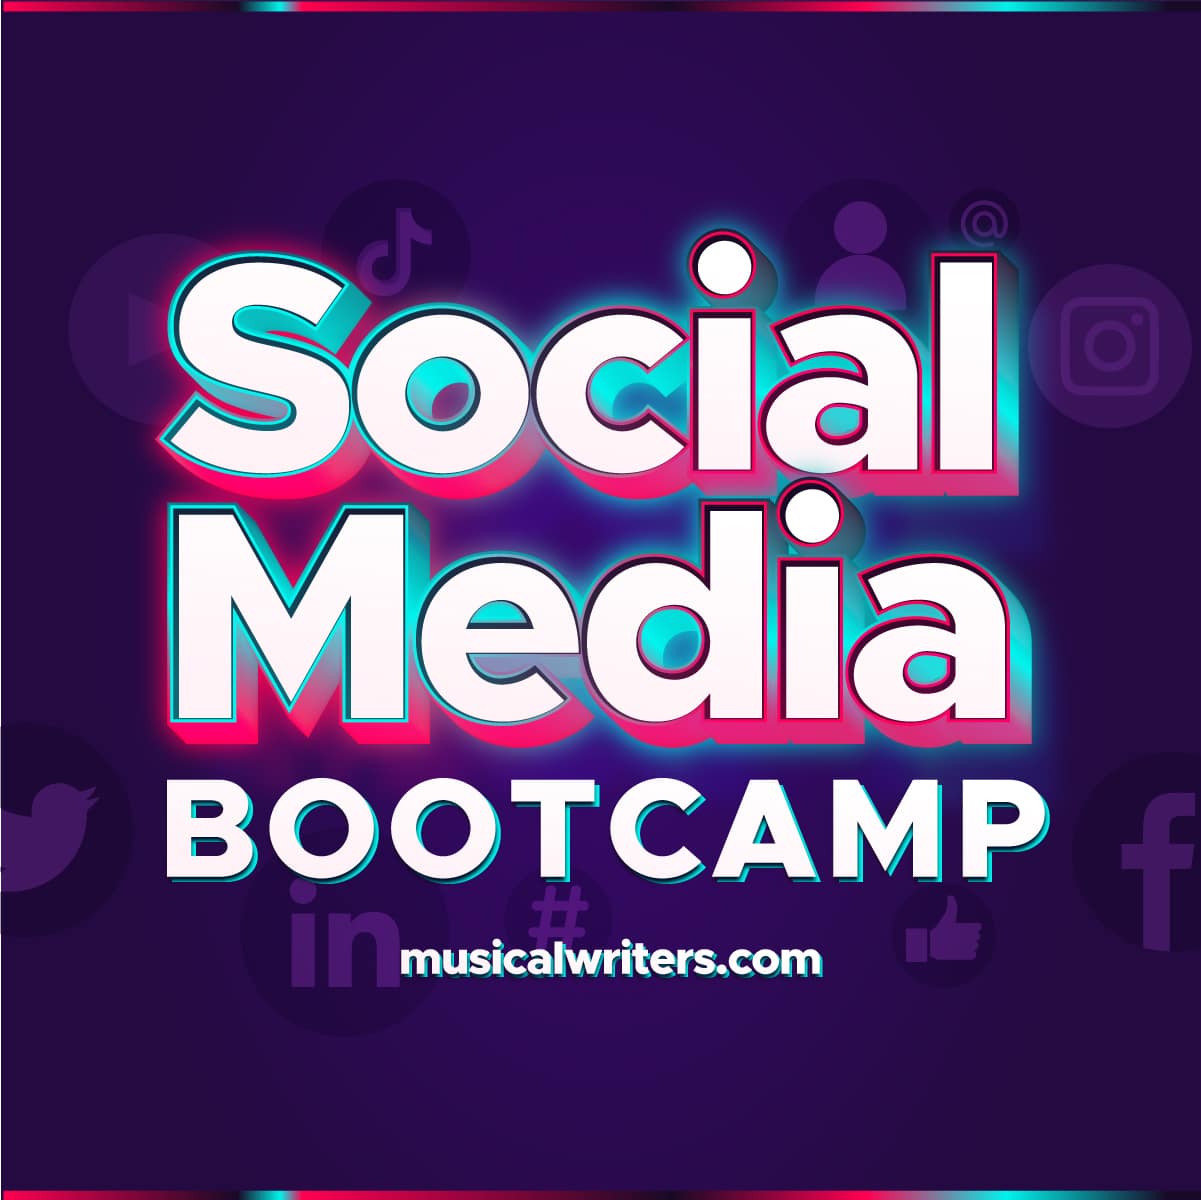 Musical Writers Social Media Bootcamp Product image - square